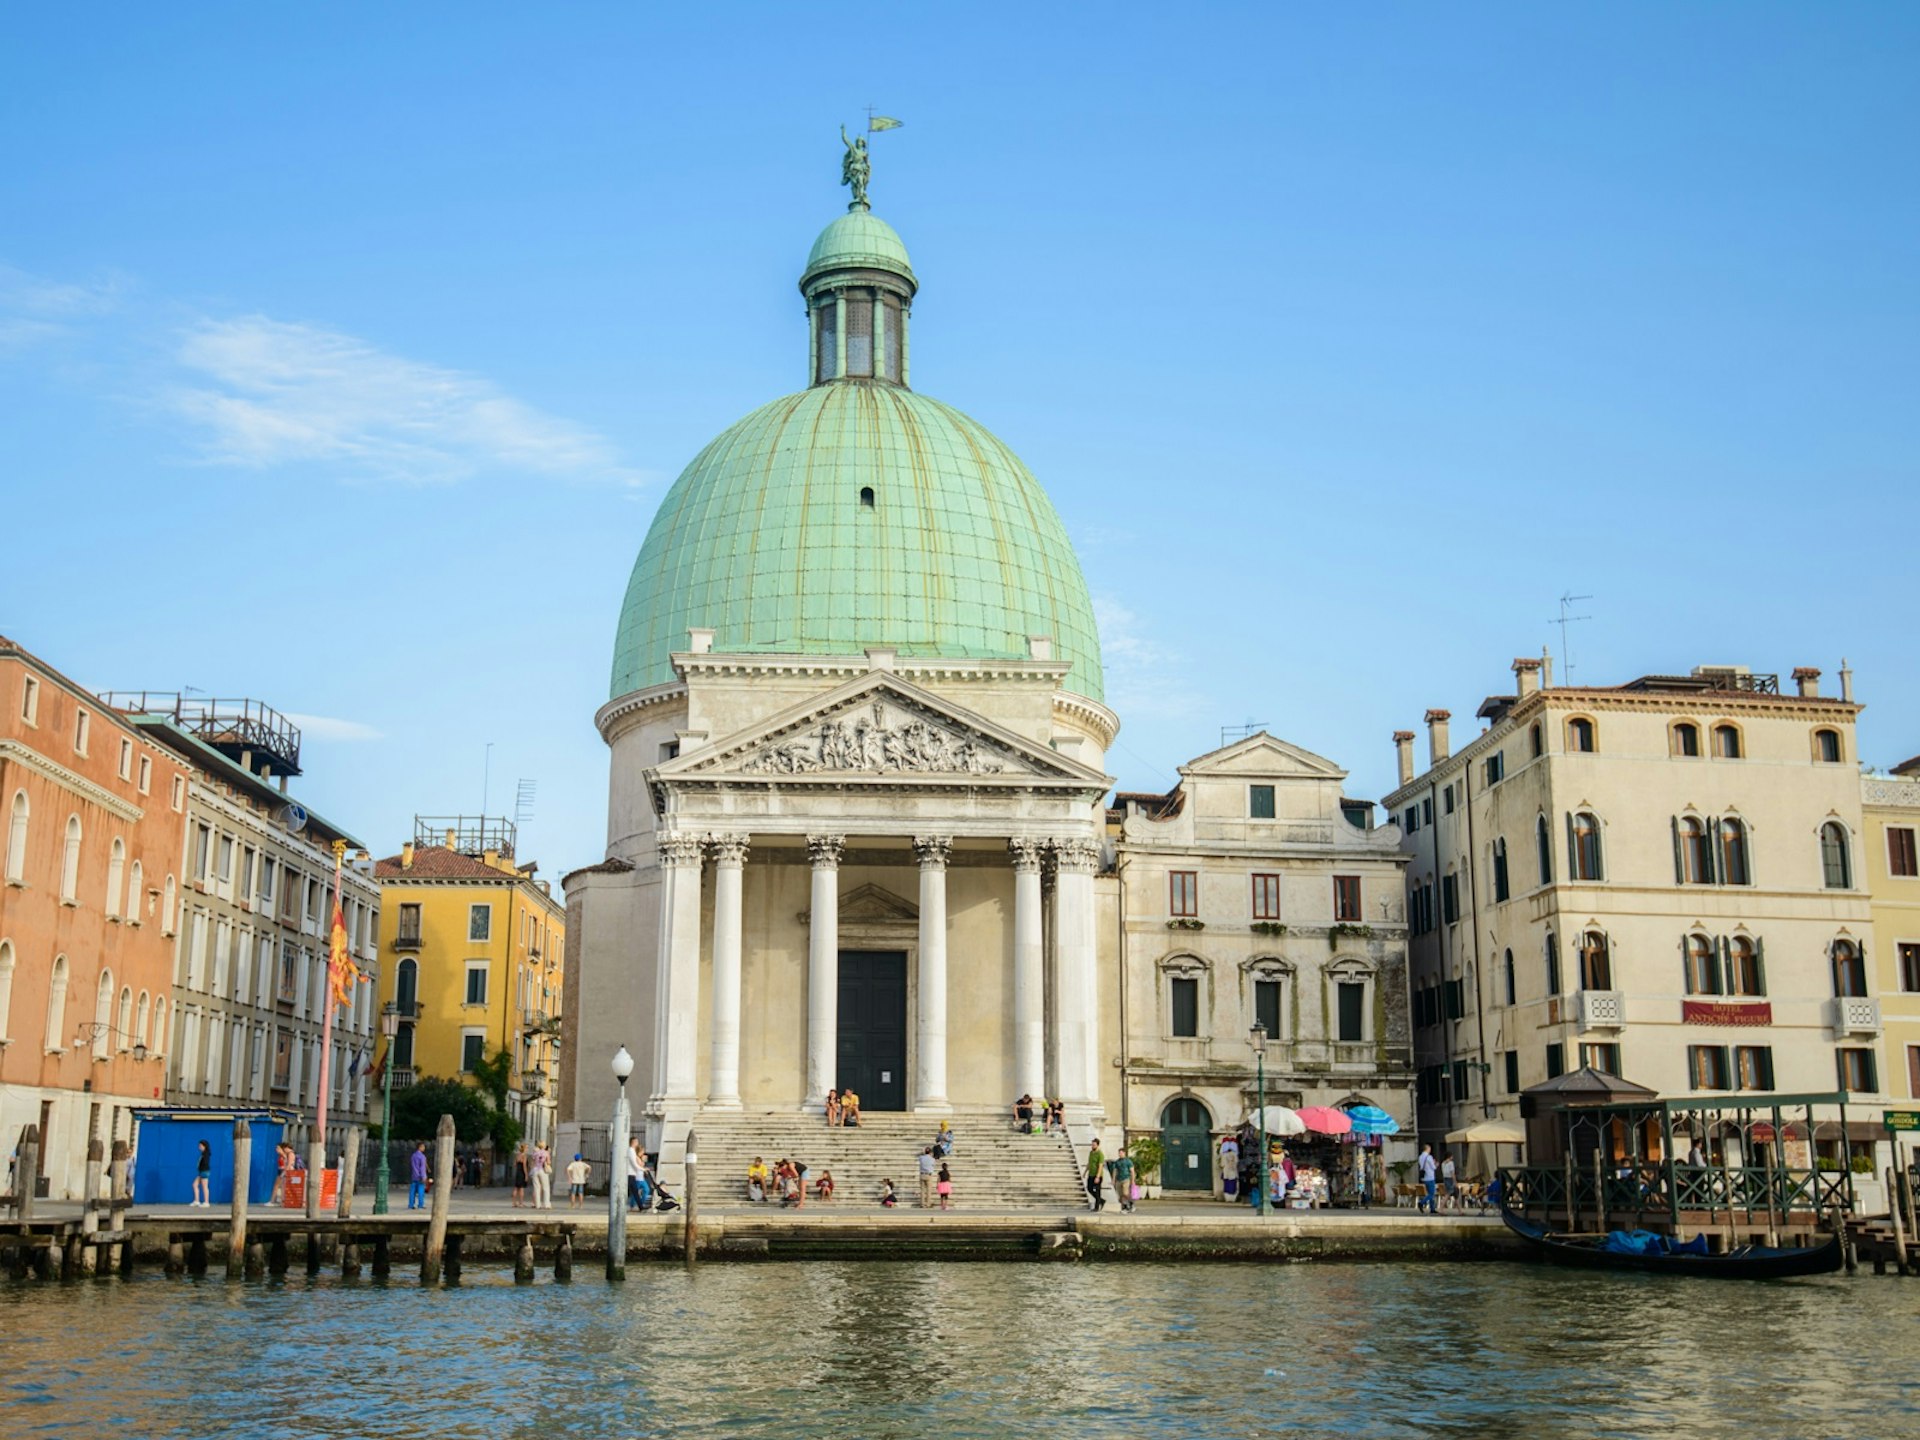 The dome of the Chiesa di San Simeone Piccolo is hard to overlook as it pierces into a clear blue sky sitting above the dark reflective waters of the canals in Santa Croce - Lonely Planet © red-feniks / Shutterstock